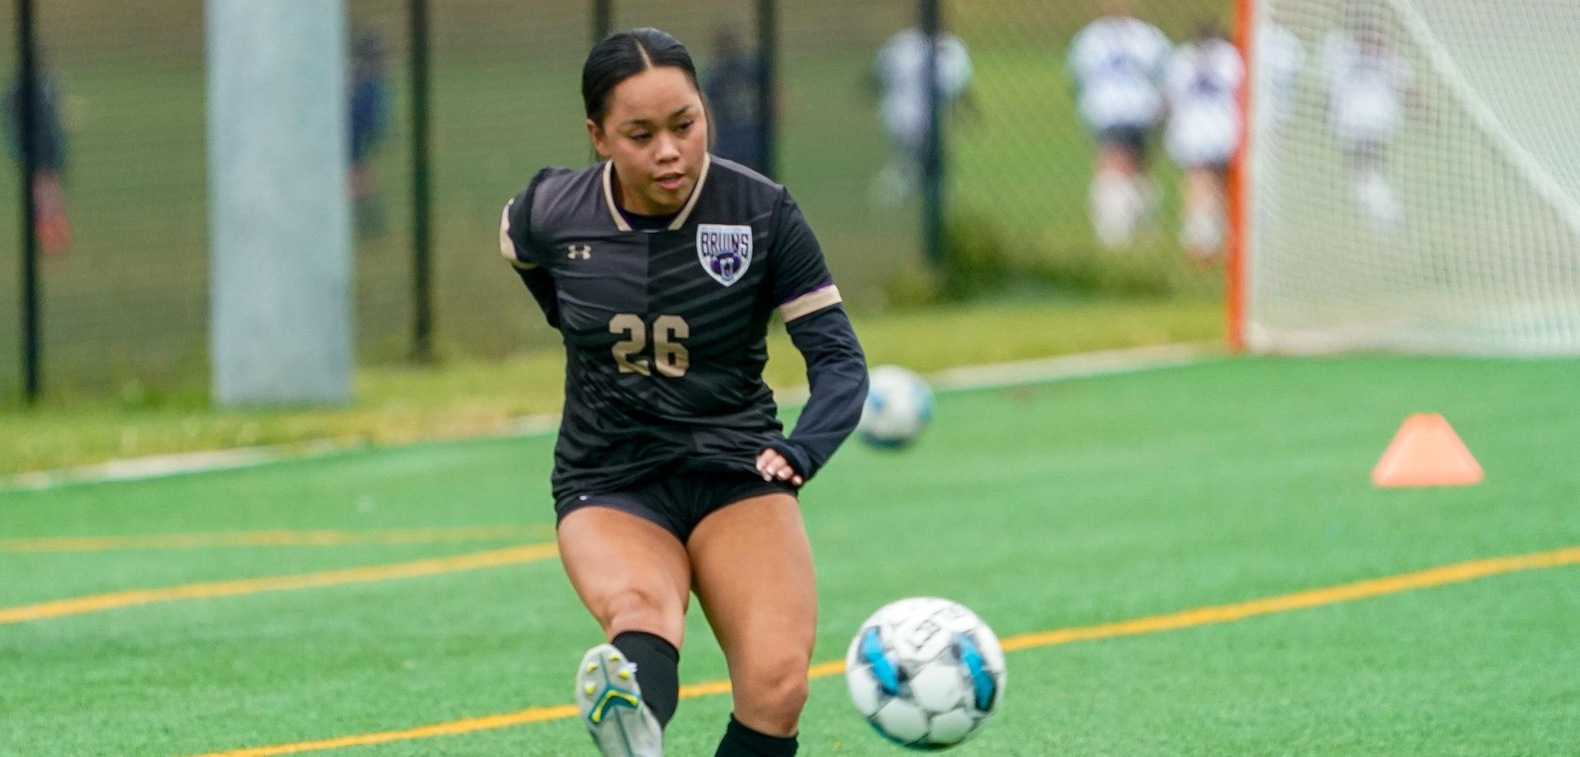 Goals galore as BU tops Florida College in CAC action